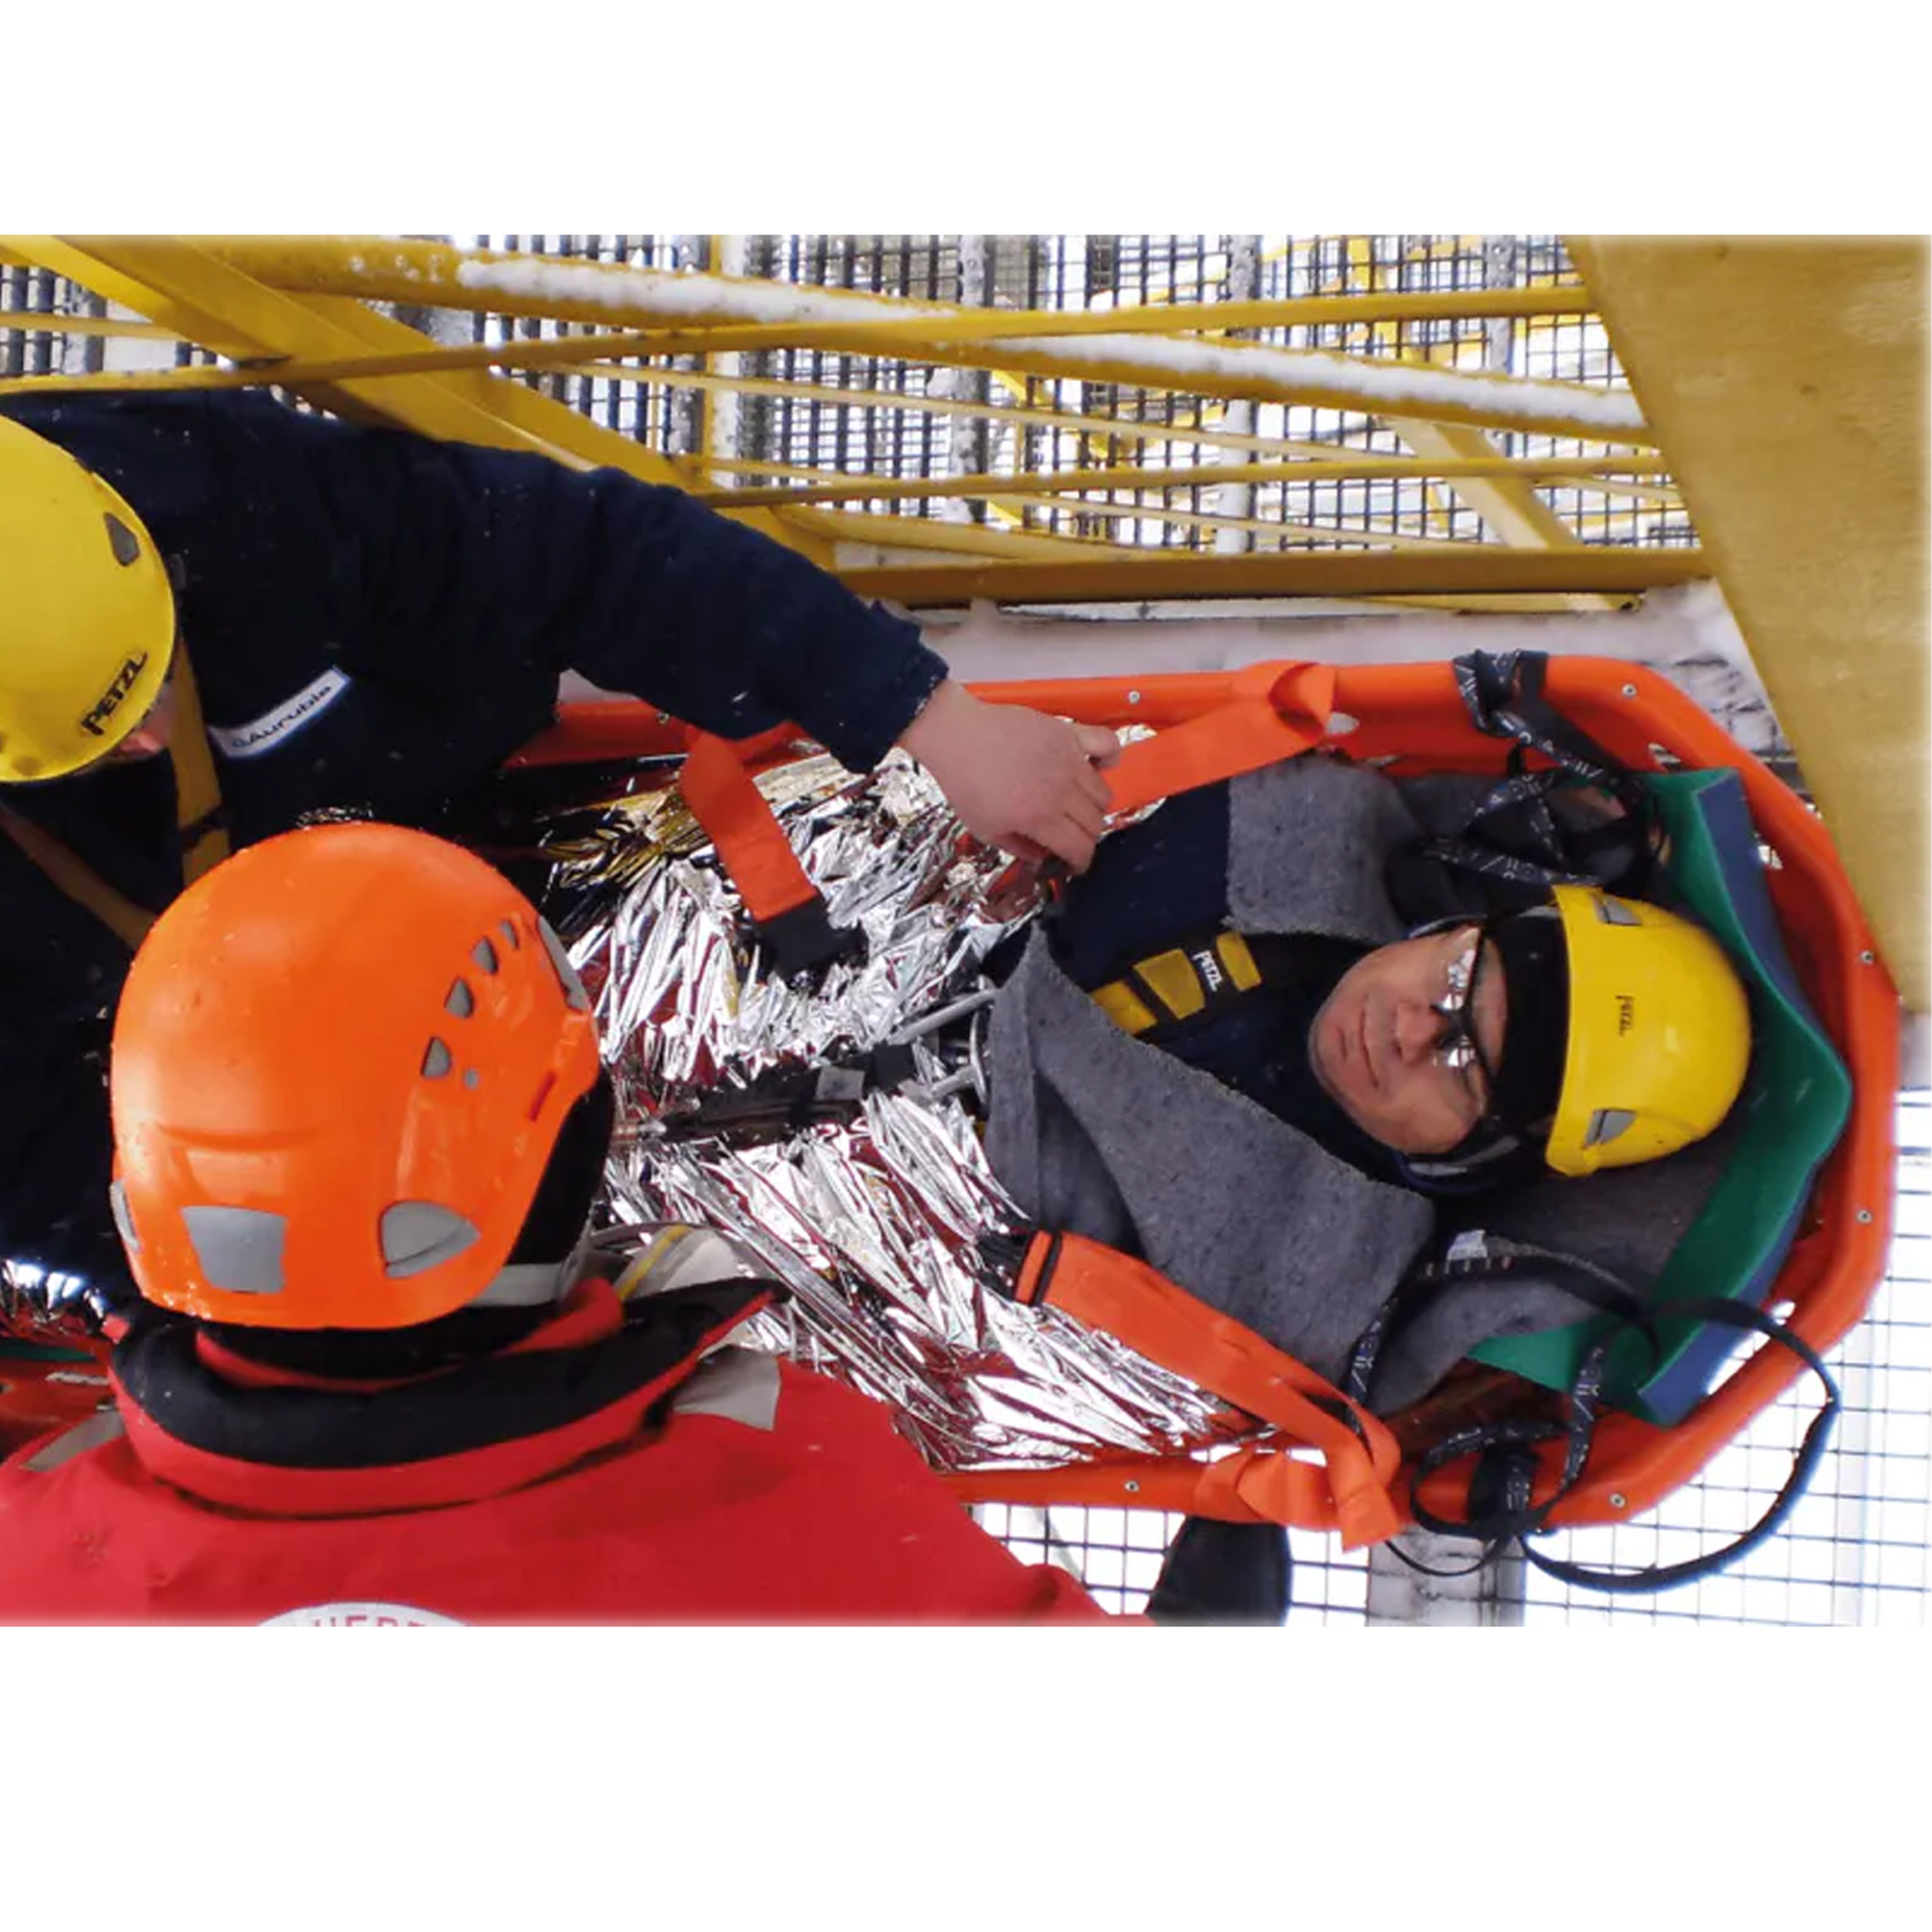 SPENCER® Universal Shell Basket Stretcher. In action photograph.